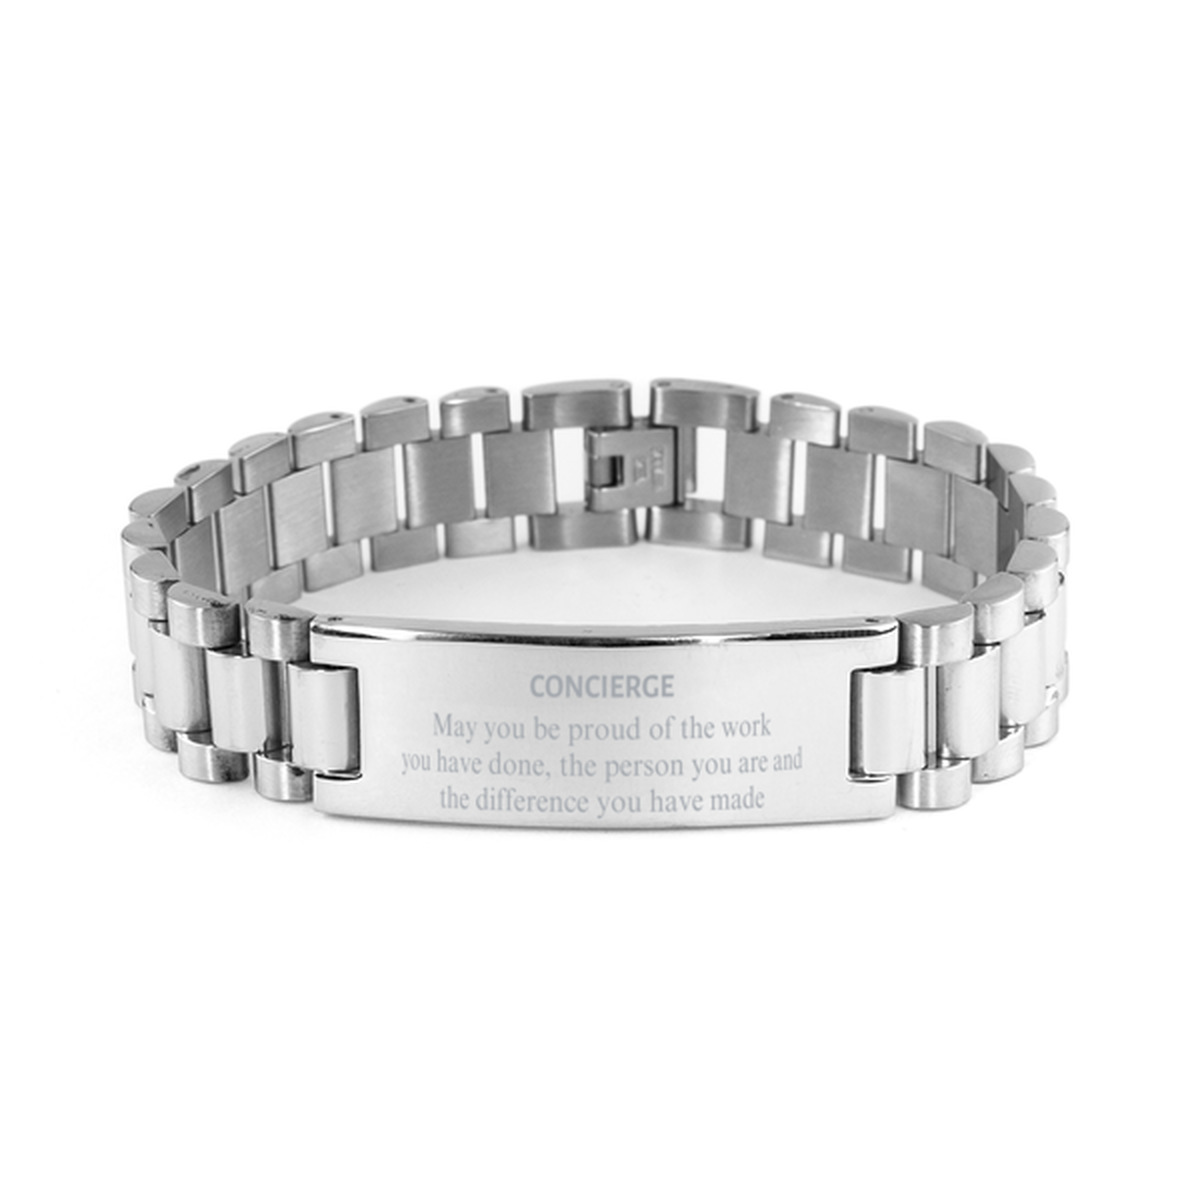 Concierge May you be proud of the work you have done, Retirement Concierge Ladder Stainless Steel Bracelet for Colleague Appreciation Gifts Amazing for Concierge